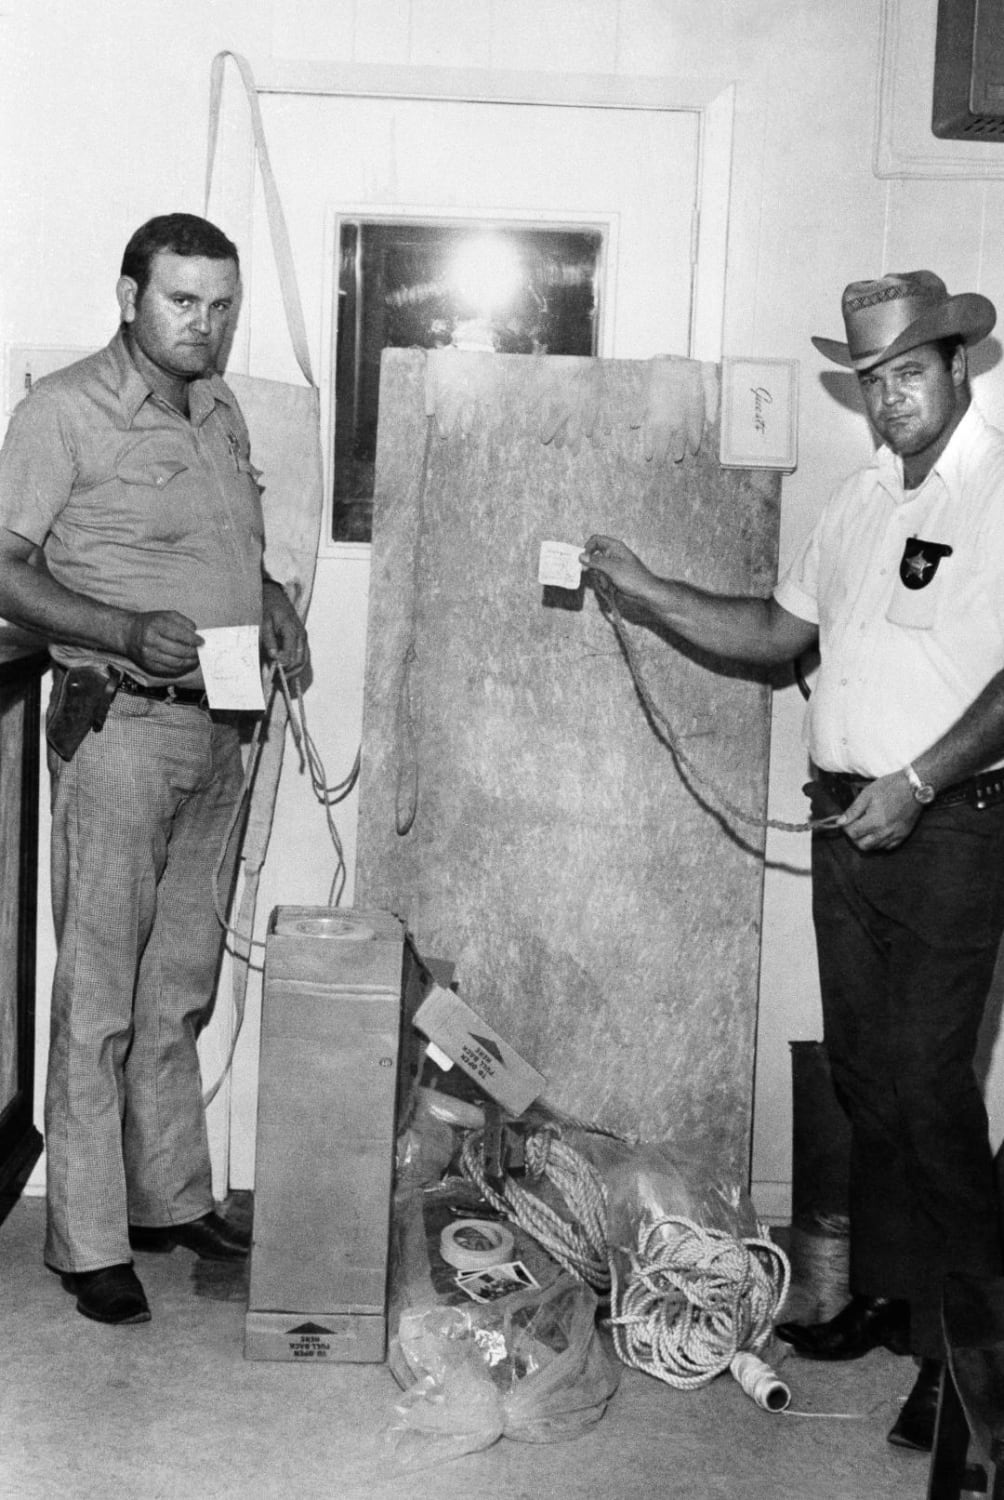 Police stand next to several tools used for torture and murder belonging to Dean Corll. Corll would often keep his victims alive for several days while he raped and tortured them before he was shot dead by his accomplice in 1973. He is known to have murdered at least 28 people all aged from 13-20.